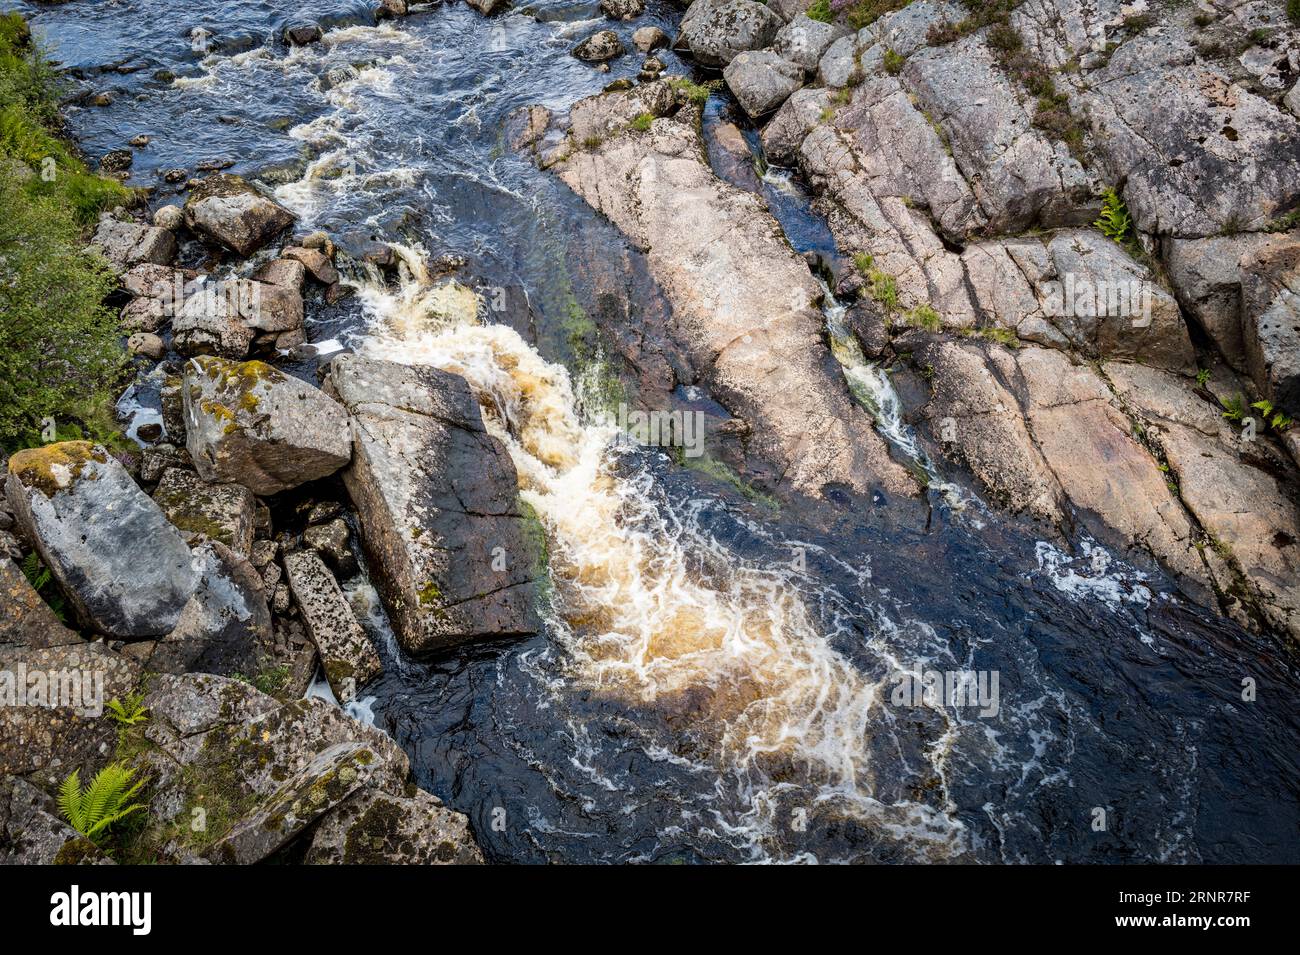 Landscape in Toss and Cromarty, highlands of Scotland with the Black Water River in the foreground Stock Photo